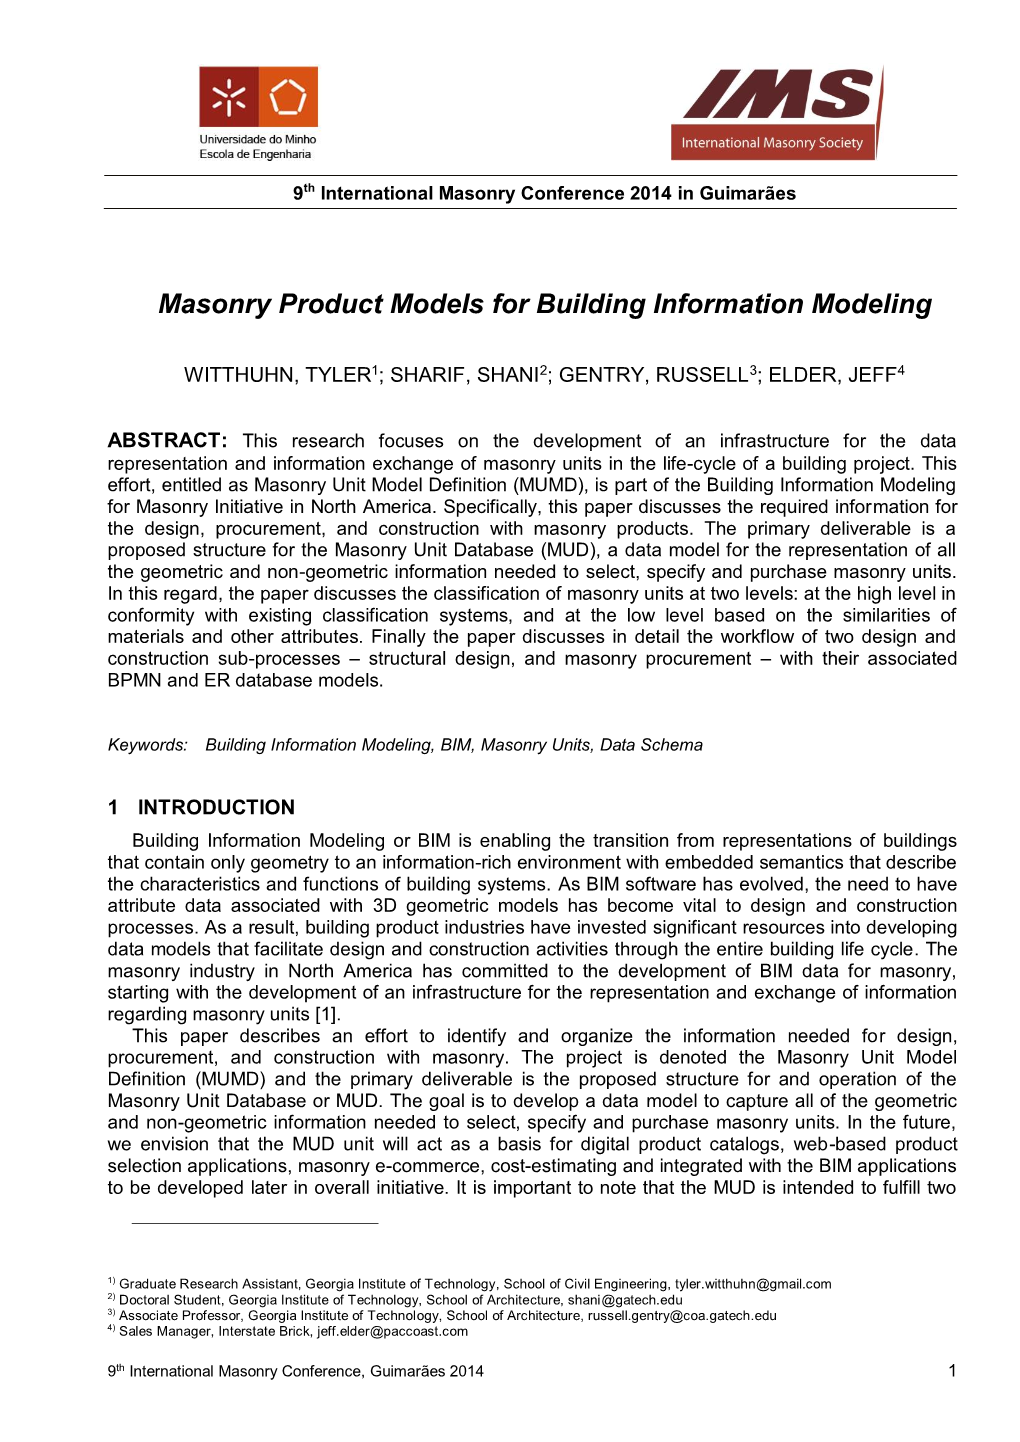 Masonry Product Models for Building Information Modeling